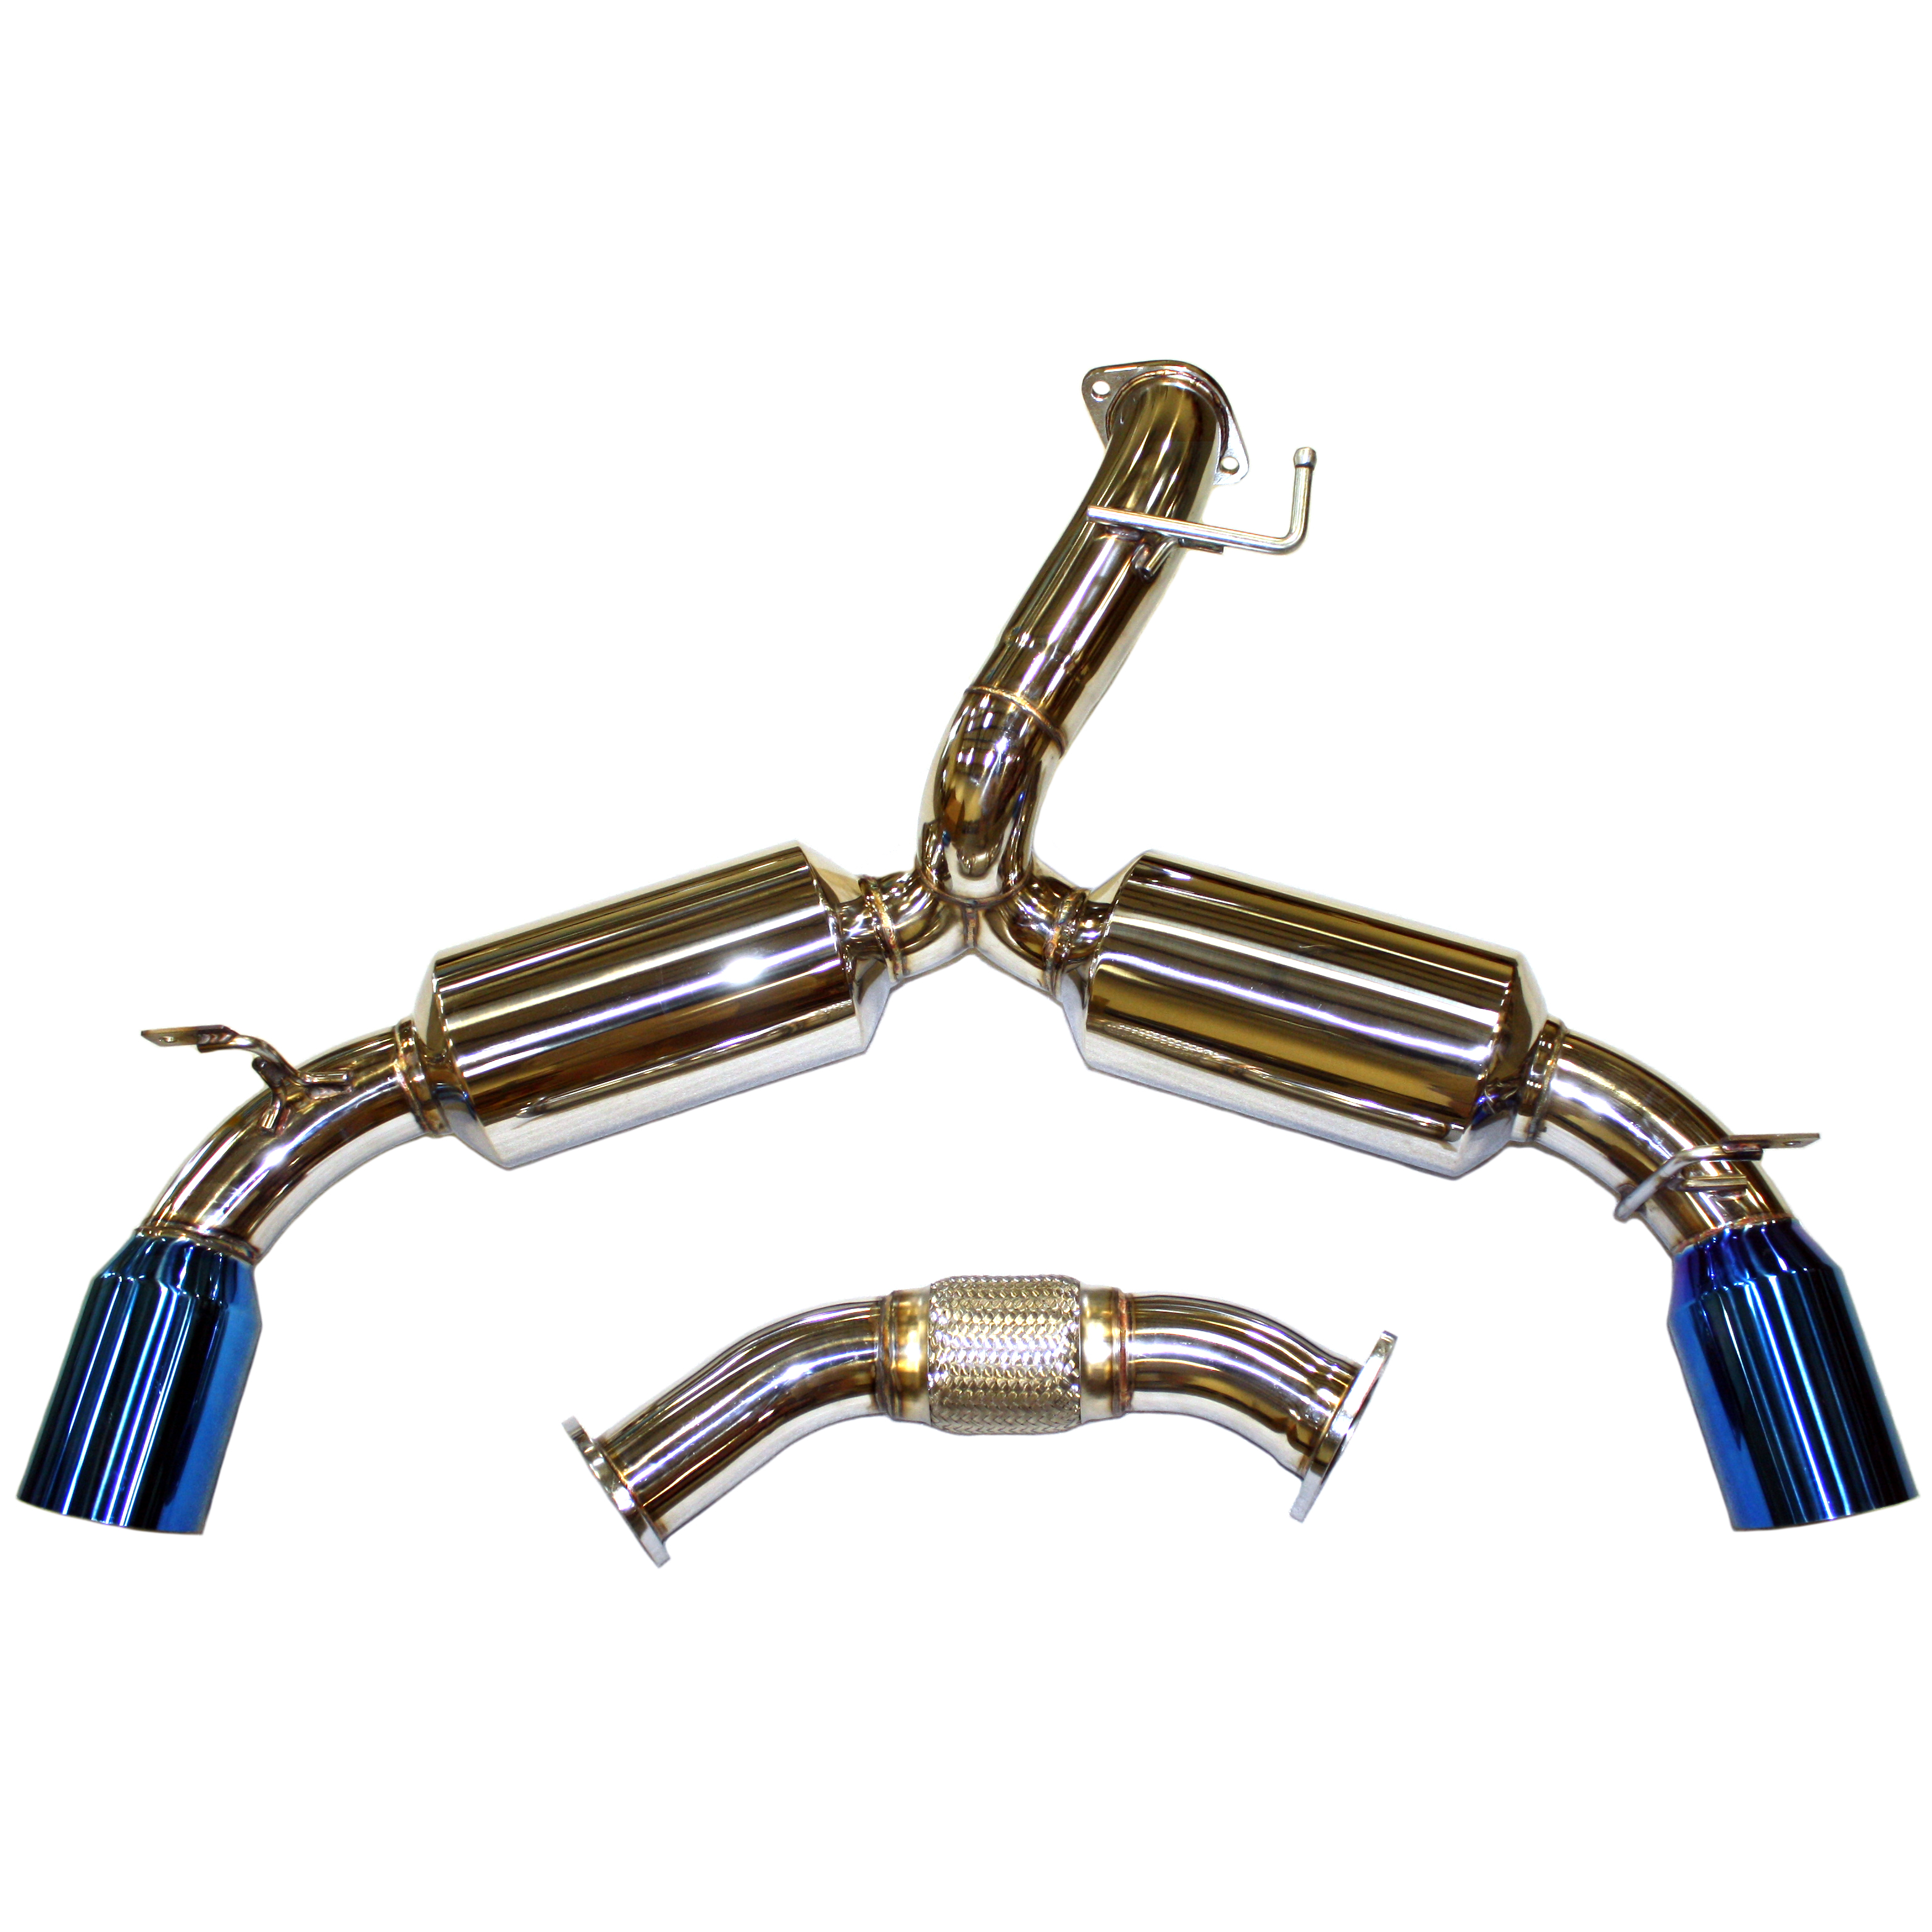 STAINLESS STEEL CATBACK EXHAUST BLUE TI COATED TIPS FOR 90-99 TOYOTA